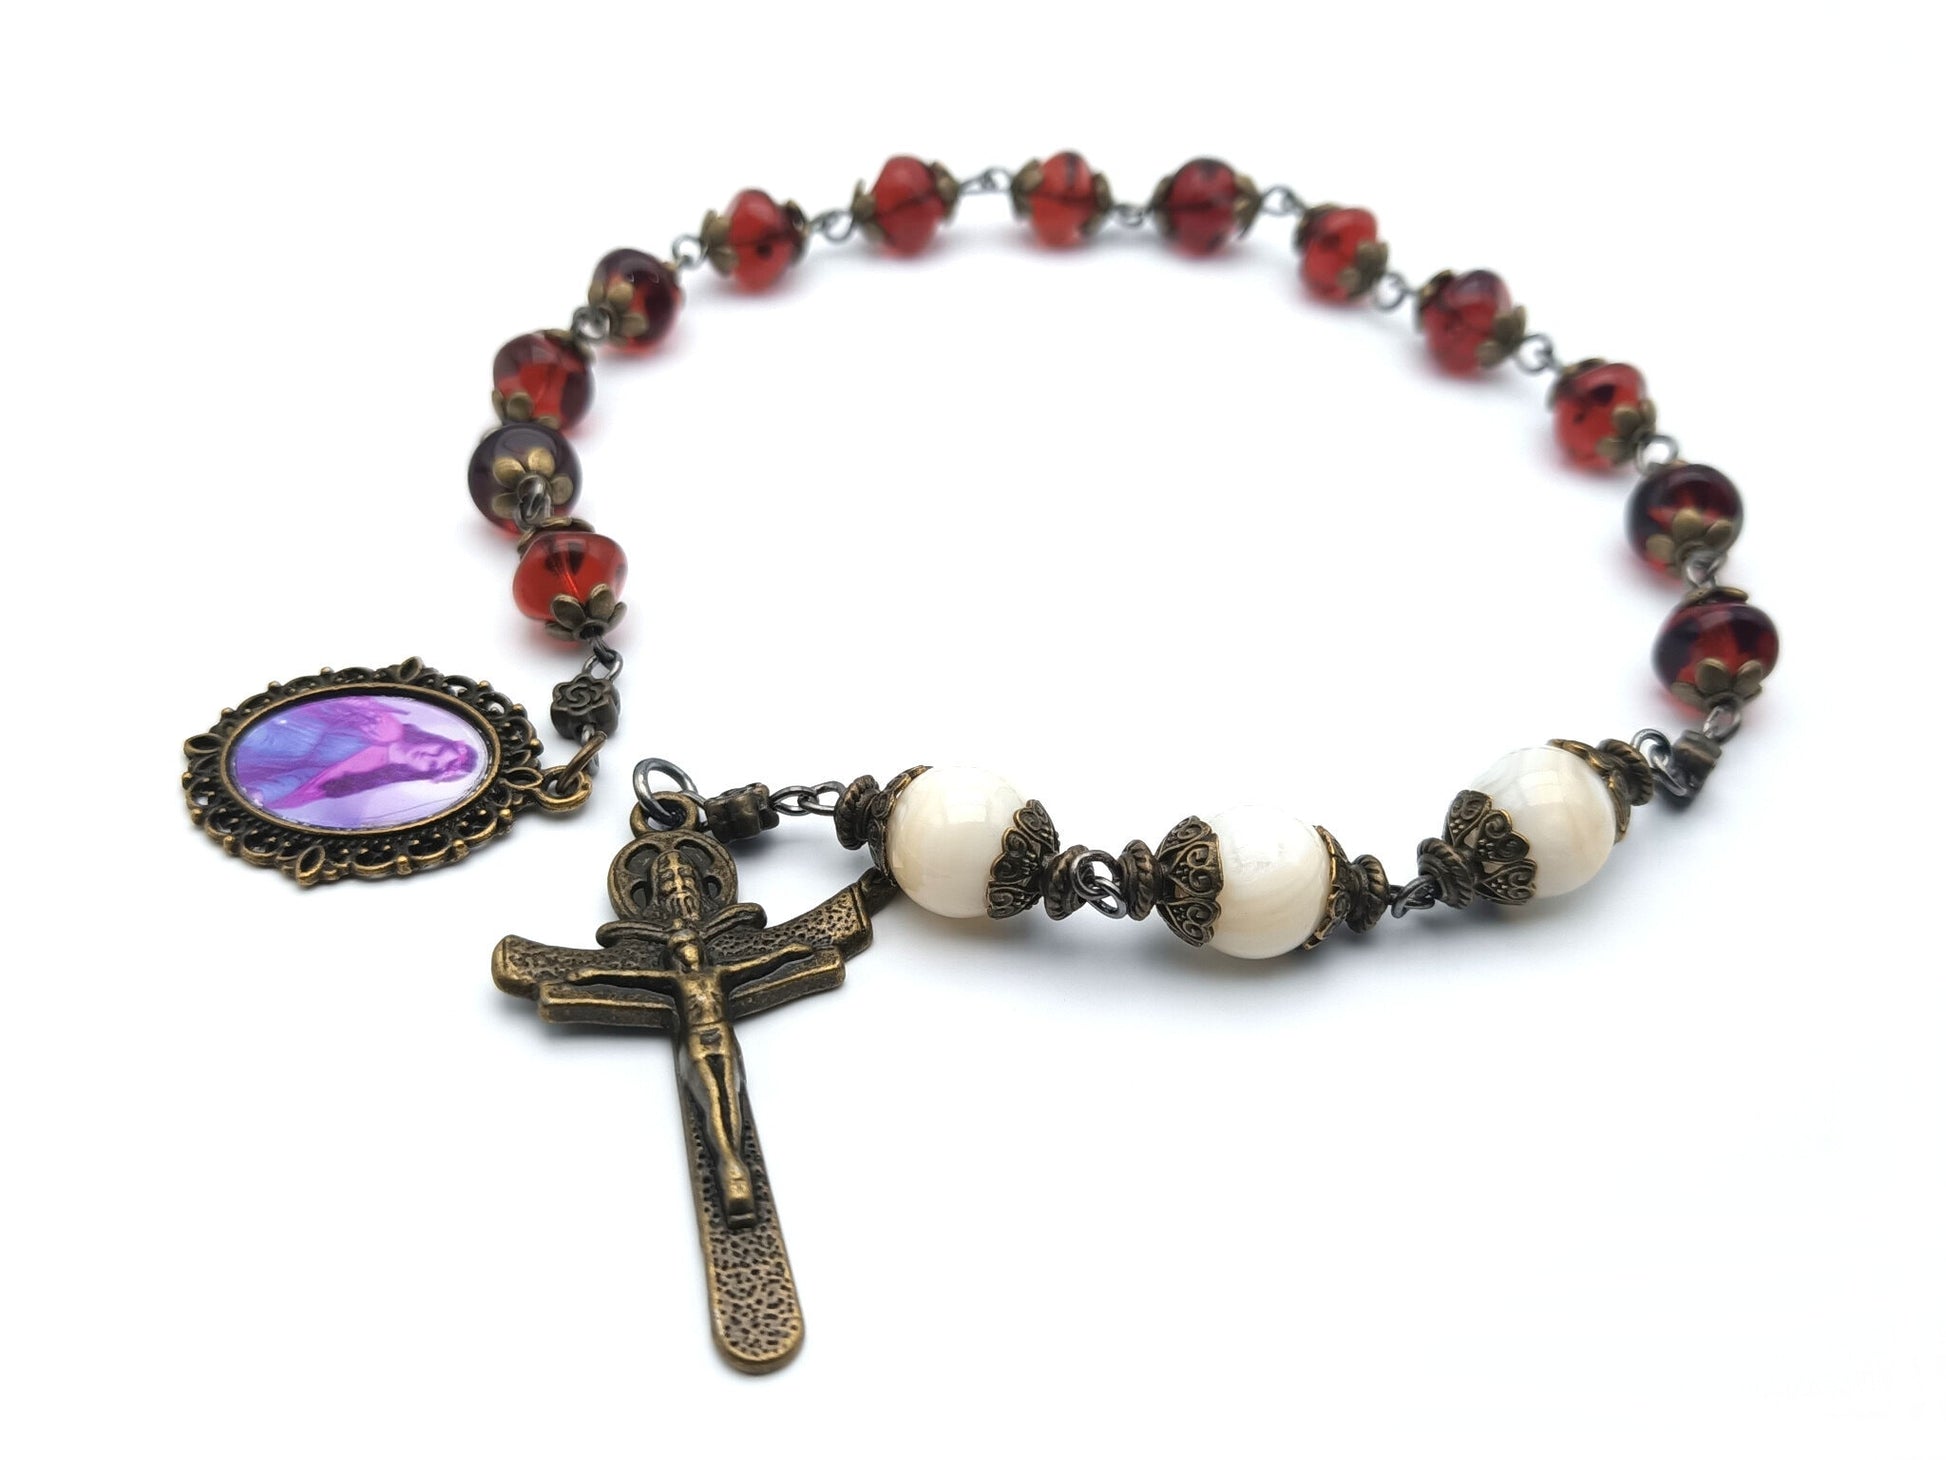 Saint Philomena unique rosary beads prayer chaplet with red nugget glass and opal beads, bronze bead caps, crucifix and picture medal.